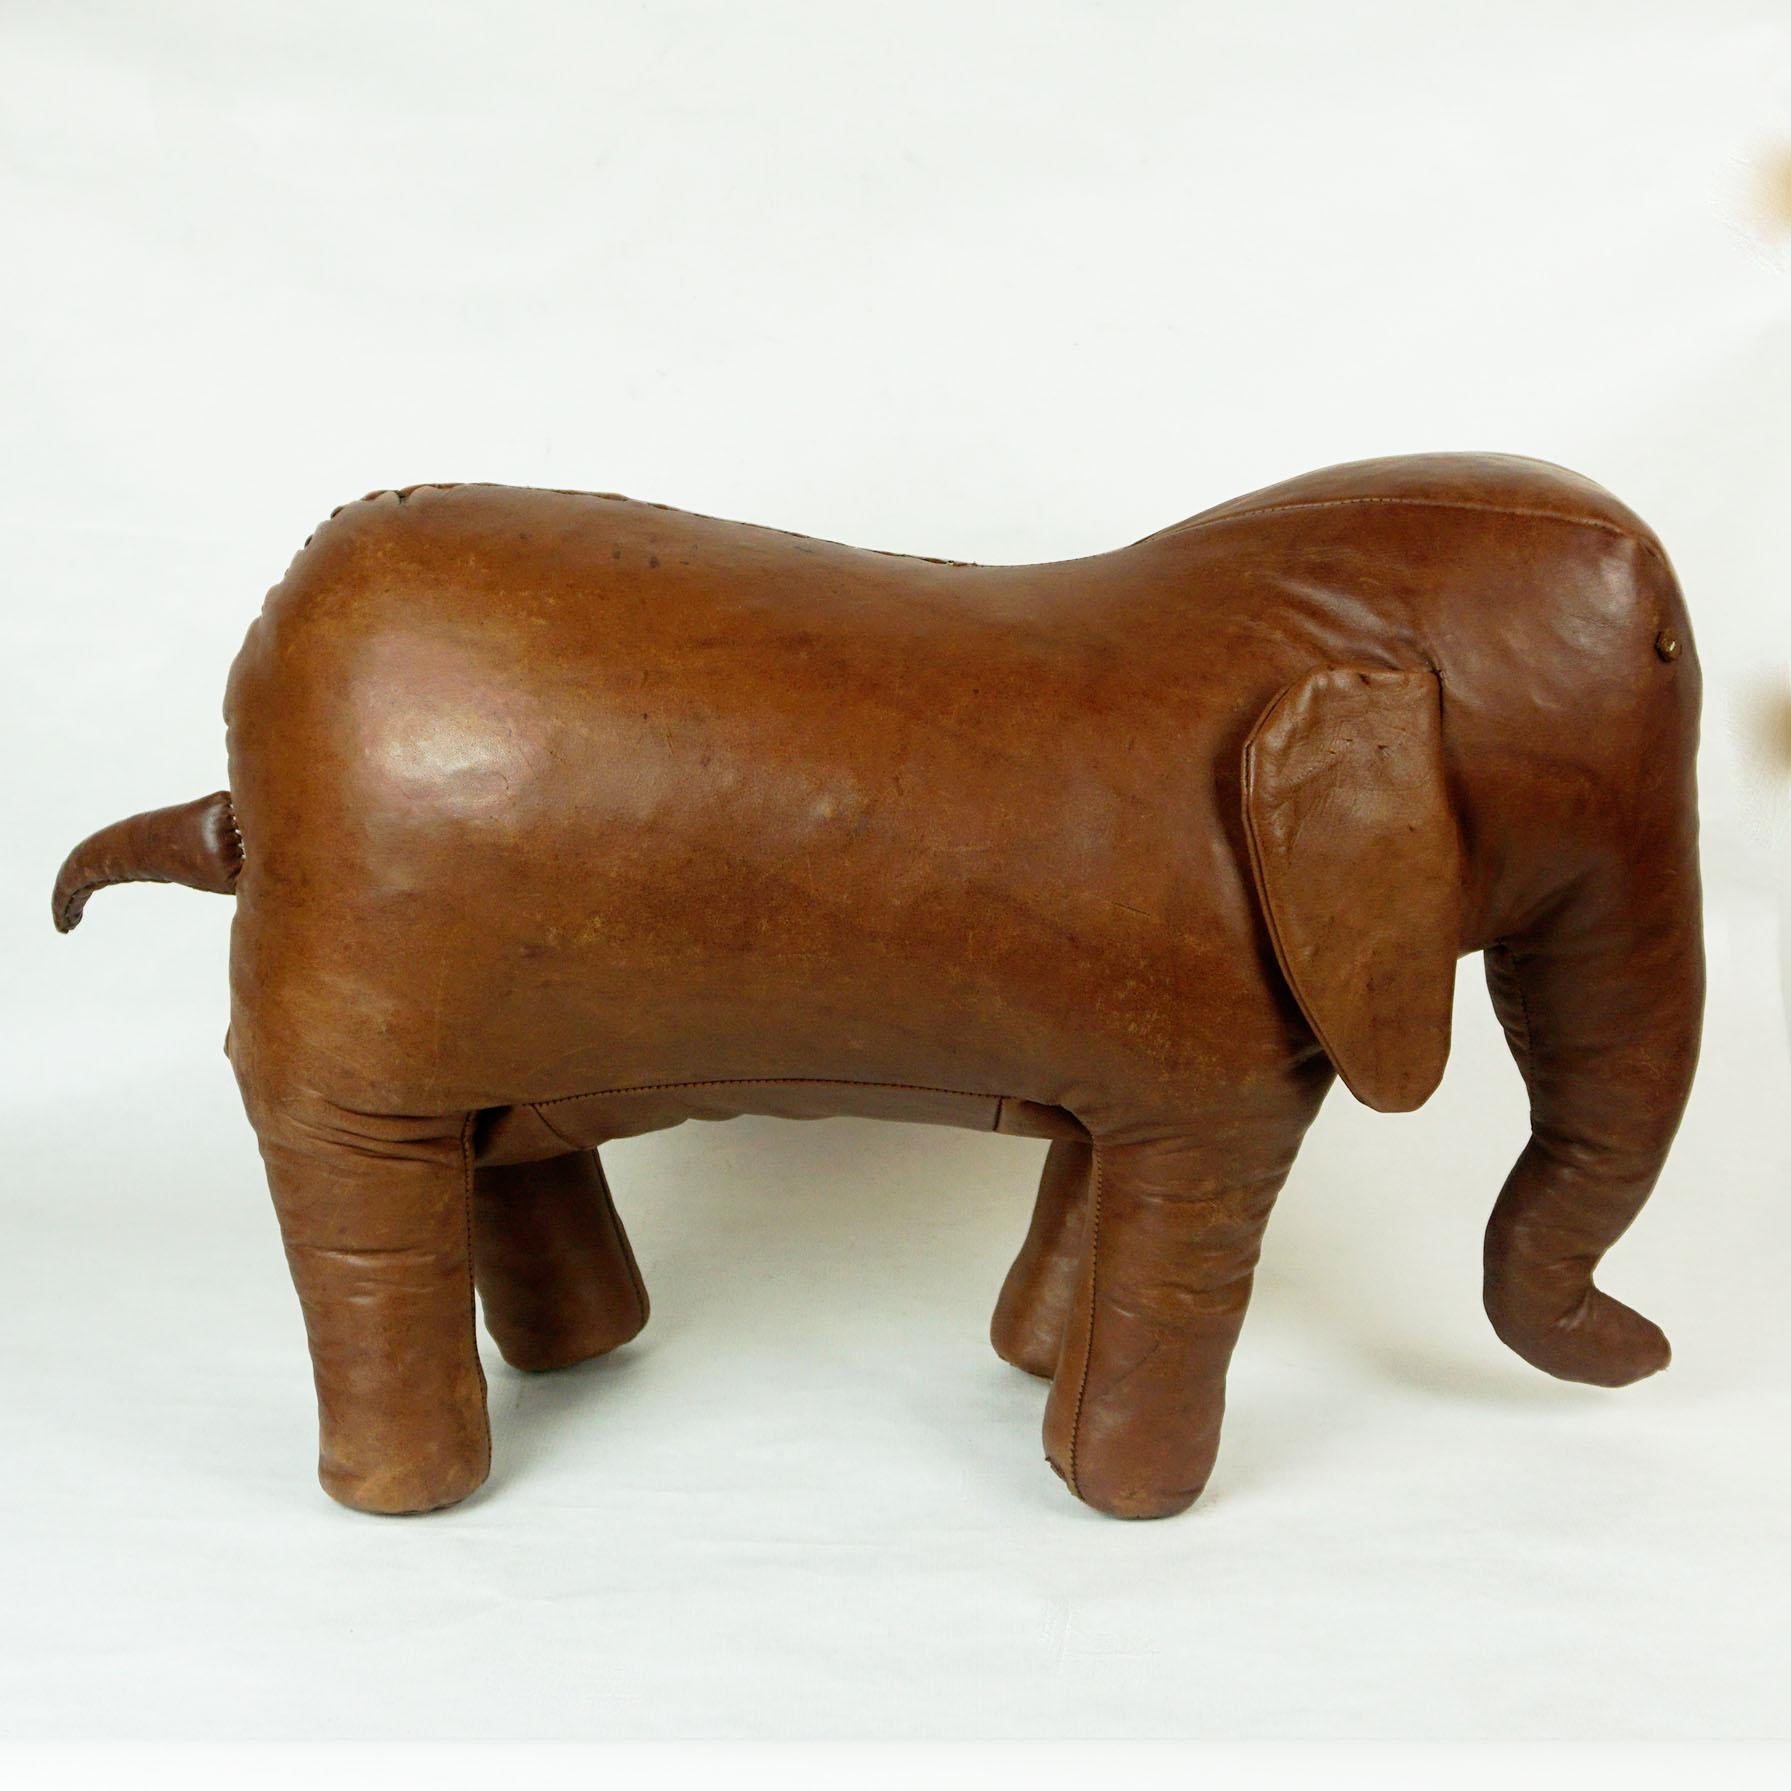 Charming Midcentury leather elephant designed by Dimitri Omersa for Abercrombie and Fitch. This piece was part of the Africa series manufactured in the 1960s. Features handstitched aged leather with tail, ears, tusks and metal eyes. Originally